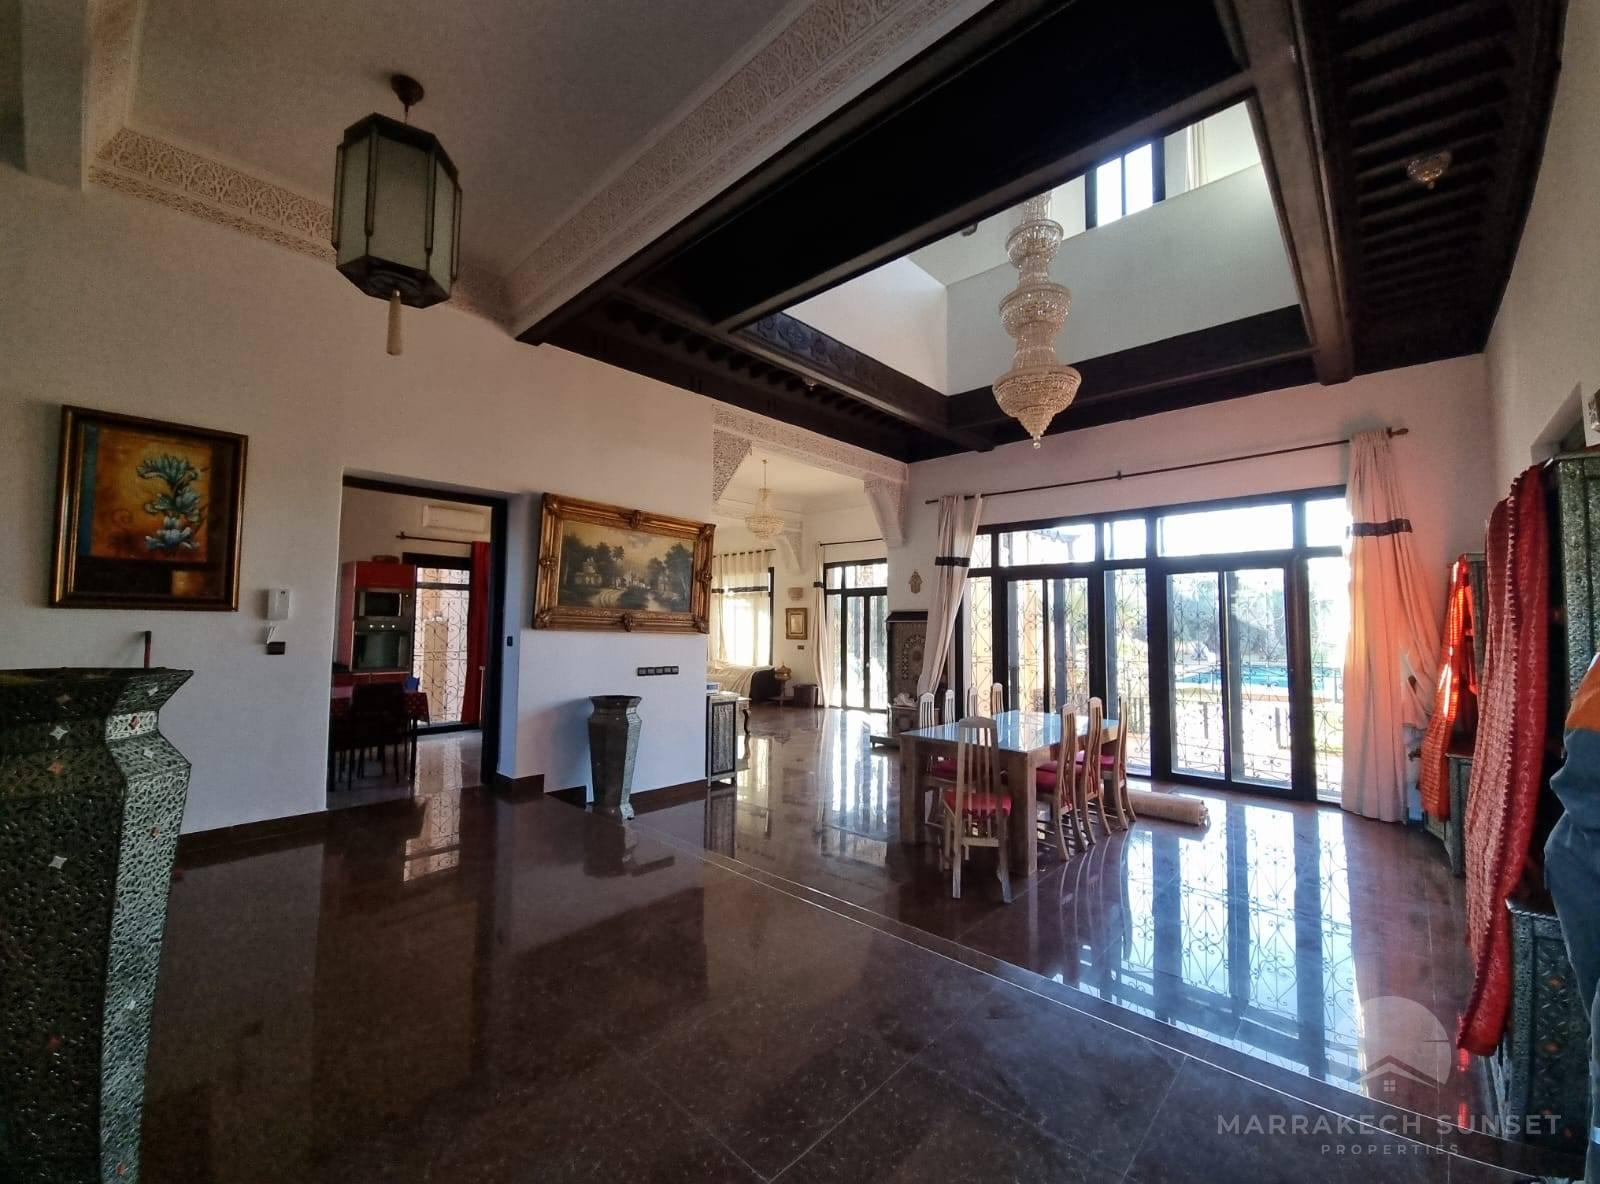 Outstanding villa for sale Marrakech with 04 bedroom